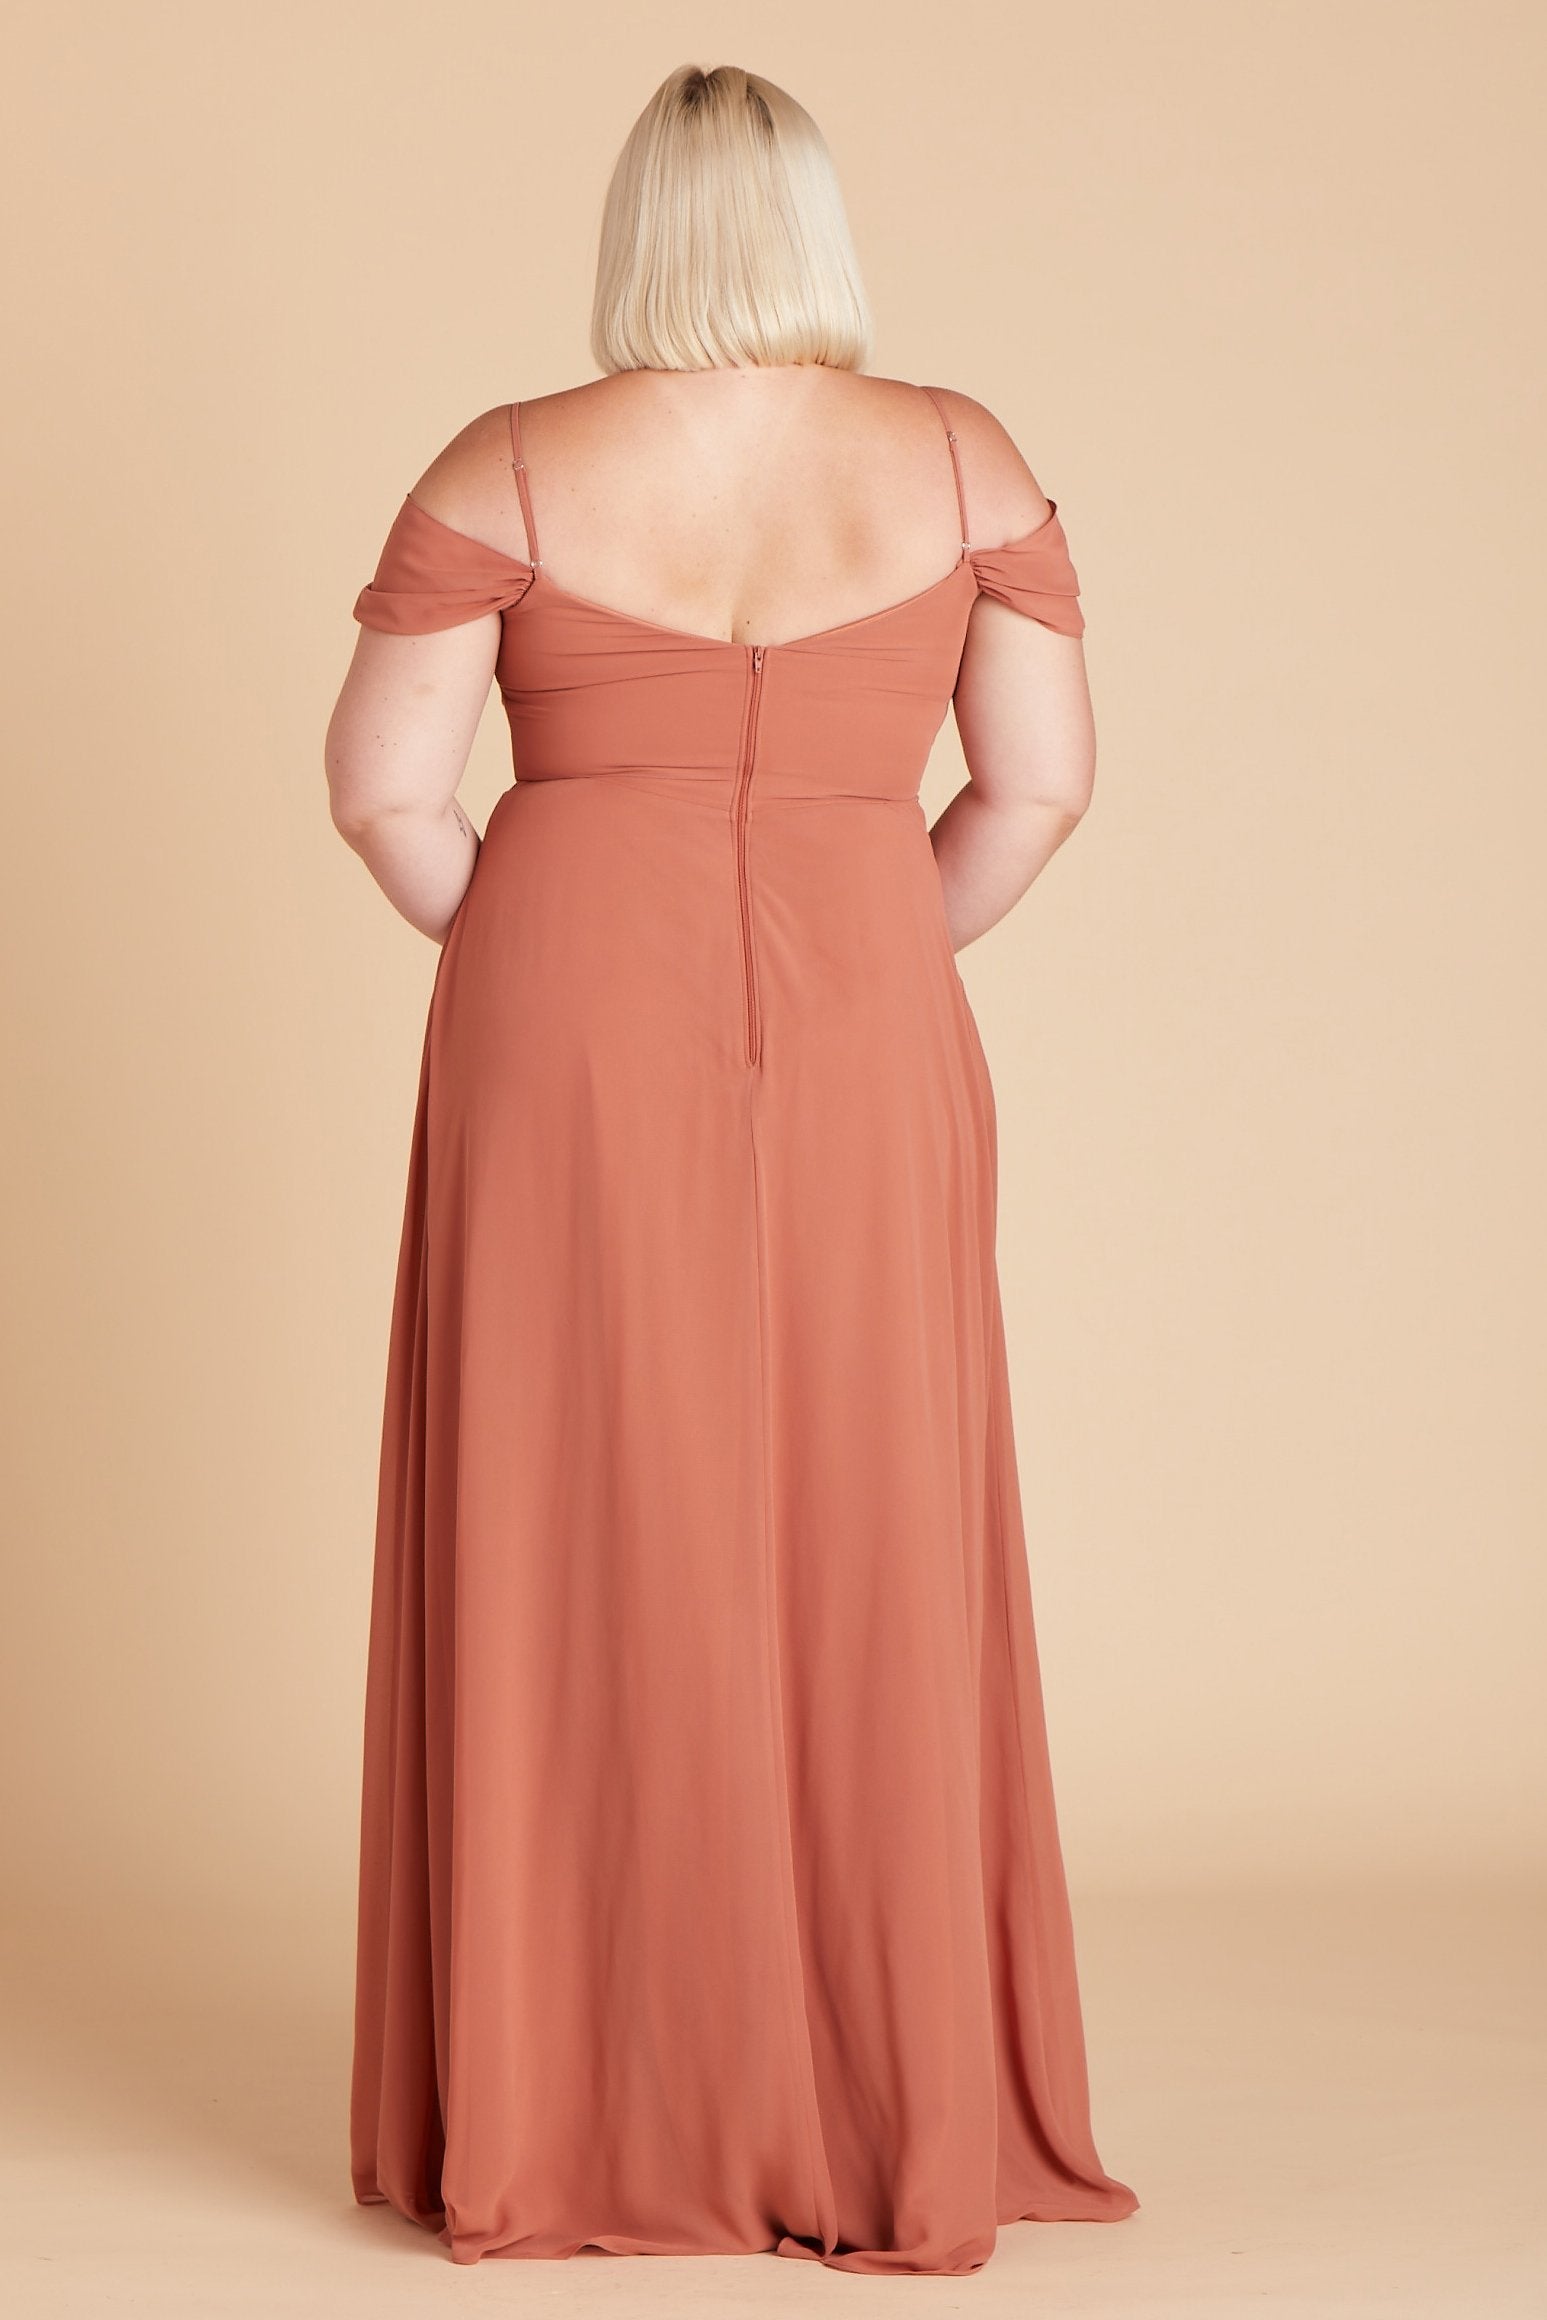 Back view of the floor-length Devin Convertible Plus Size Bridesmaid Dress in terracotta chiffon features a fitted bust and waist with a flowing skirt that moves with the model.